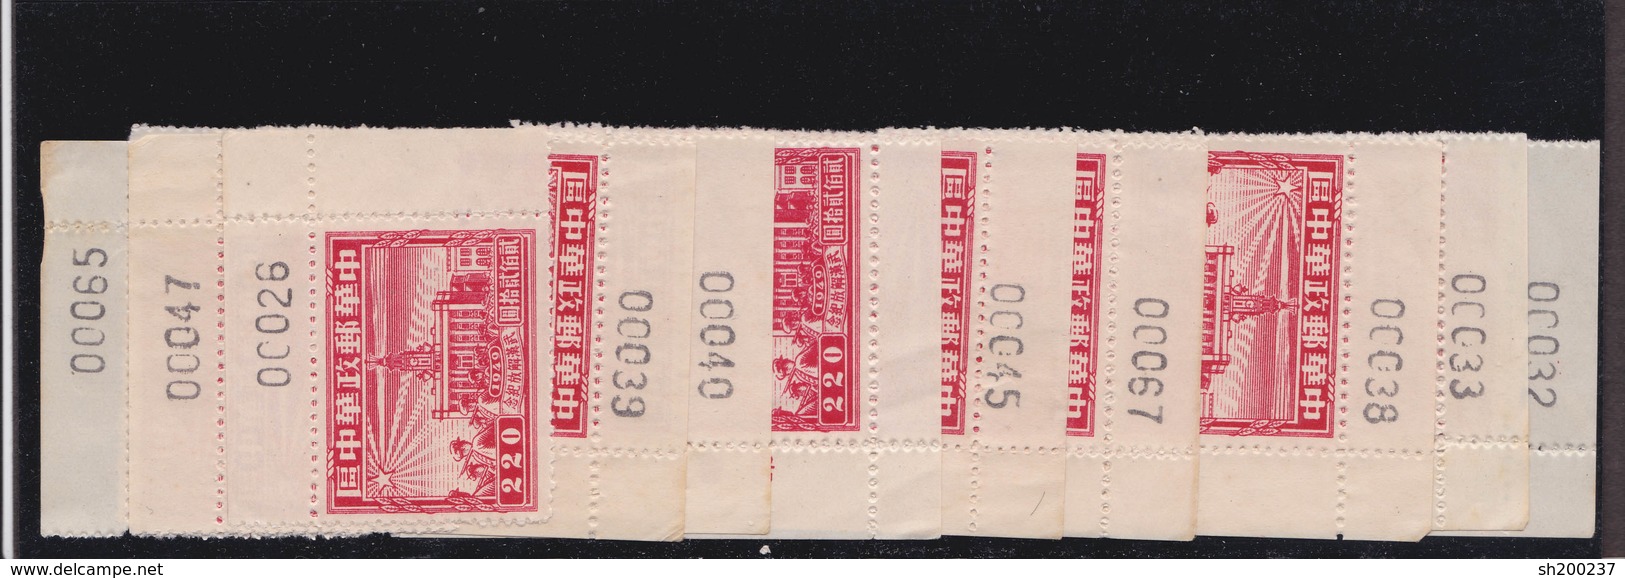 1949 Lib. Of Hankow LCC87 Corner Number - Central China 1948-49